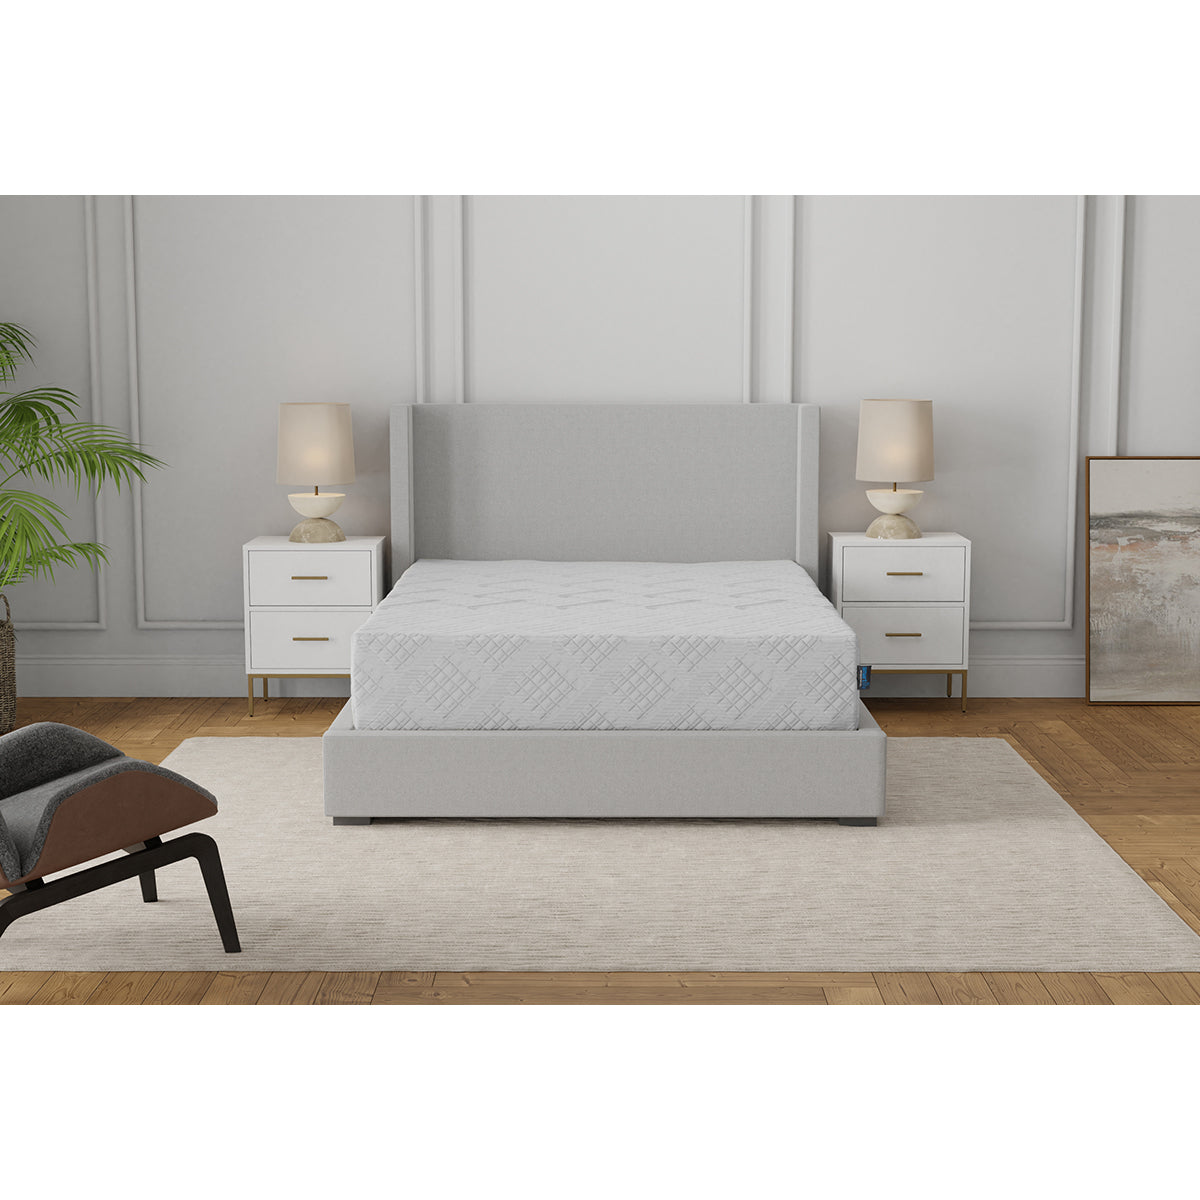 SmartLife Calla Plush Mattress On Bed Frame In Bedroom Front View